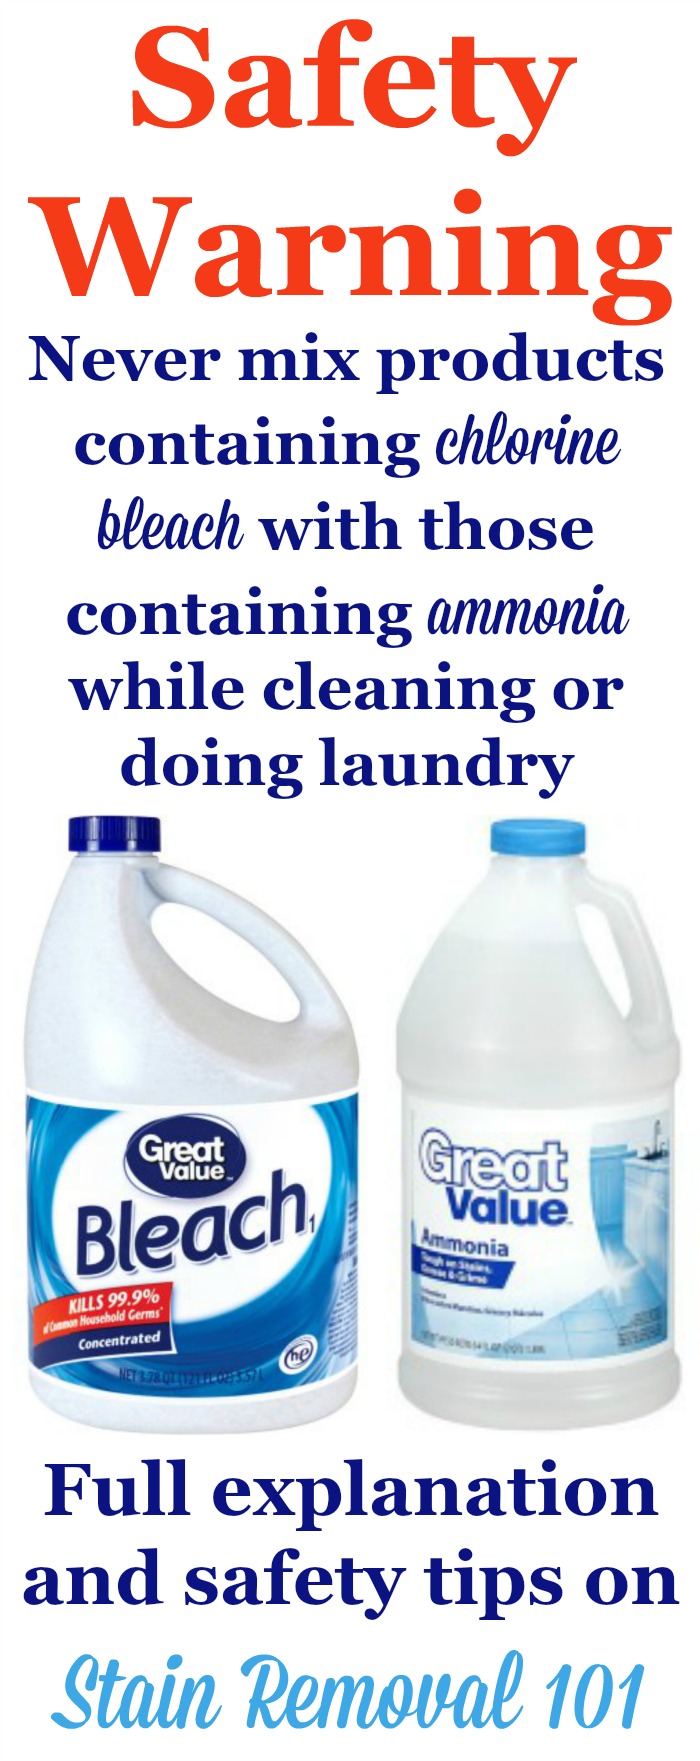 https://www.stain-removal-101.com/image-files/bleach-and-ammonia-2.jpg